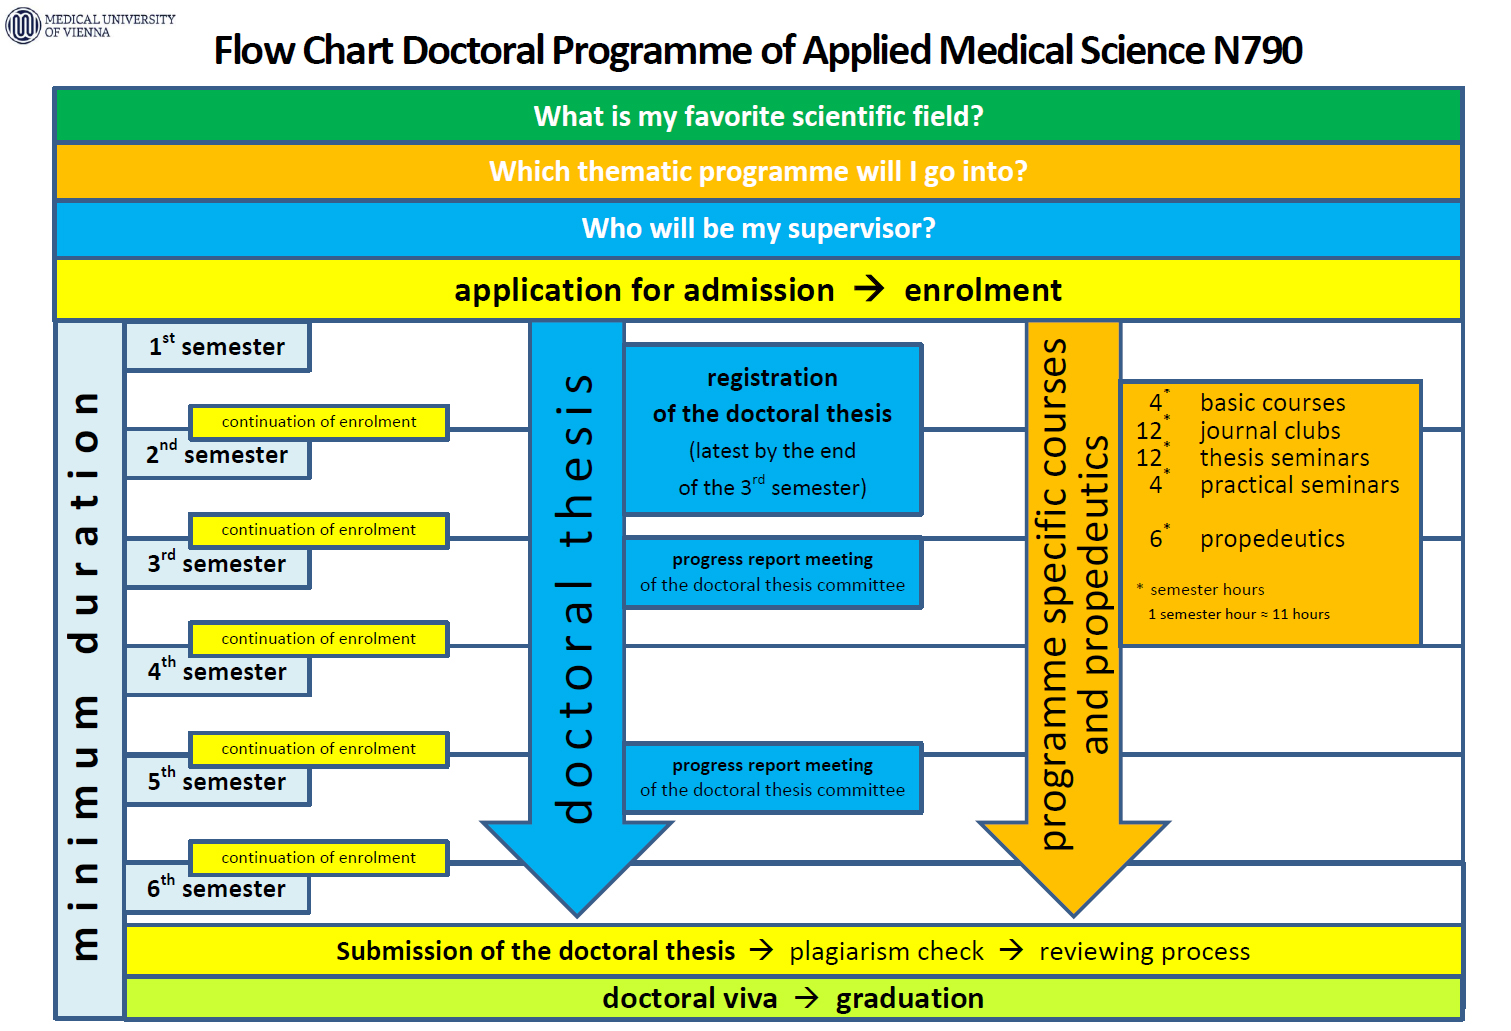 Flow Chart of the Doctoral Programme of Applied Medical Science N790